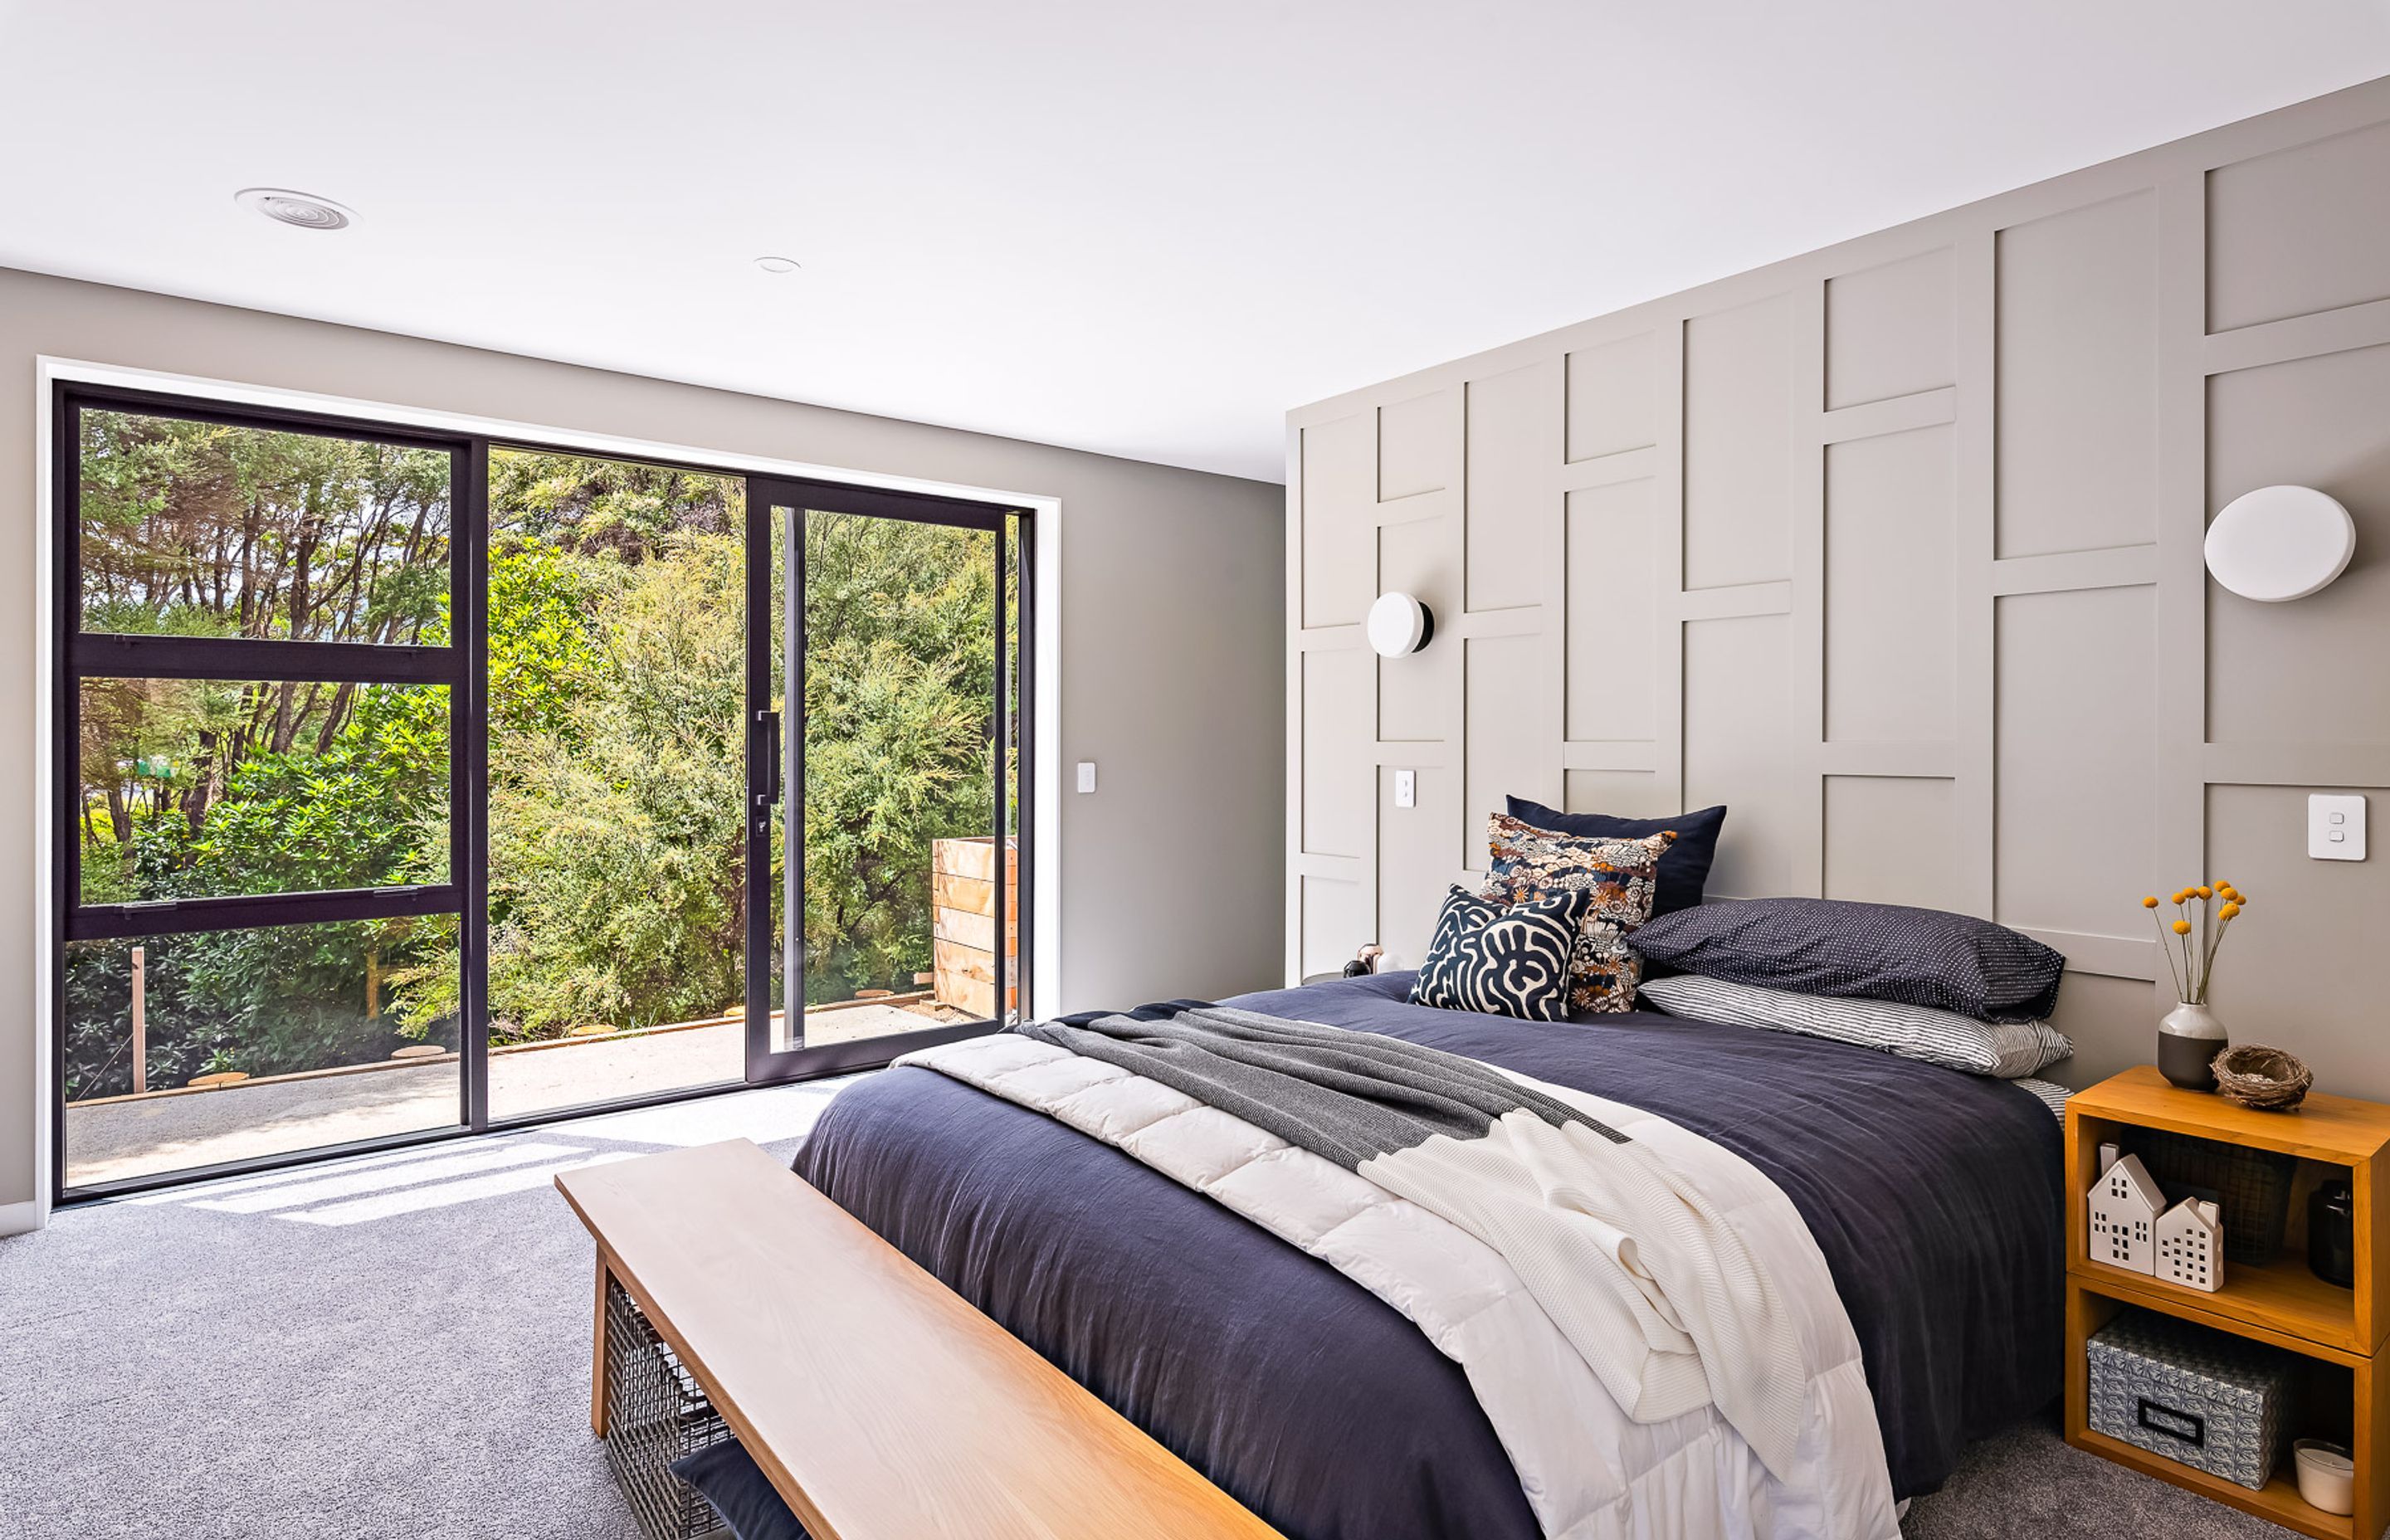 The main bedroom enjoys a backdrop of native kānuka and opens out onto a private courtyard space for morning sun.